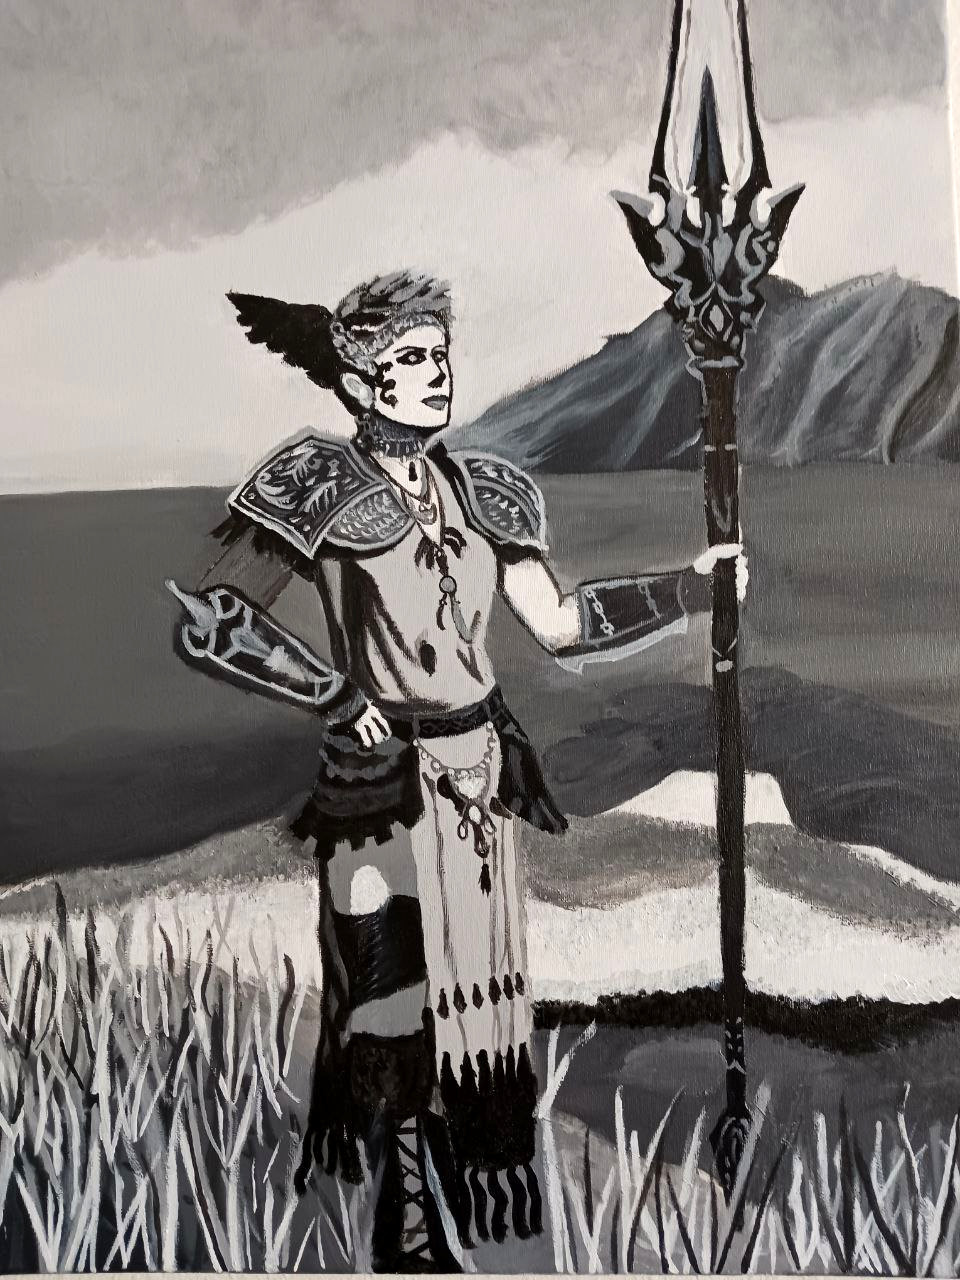 A painting in black in white of a warrior woman in heavy armor, holding a lance, standing on a hill with a ocean and mountain behind her.